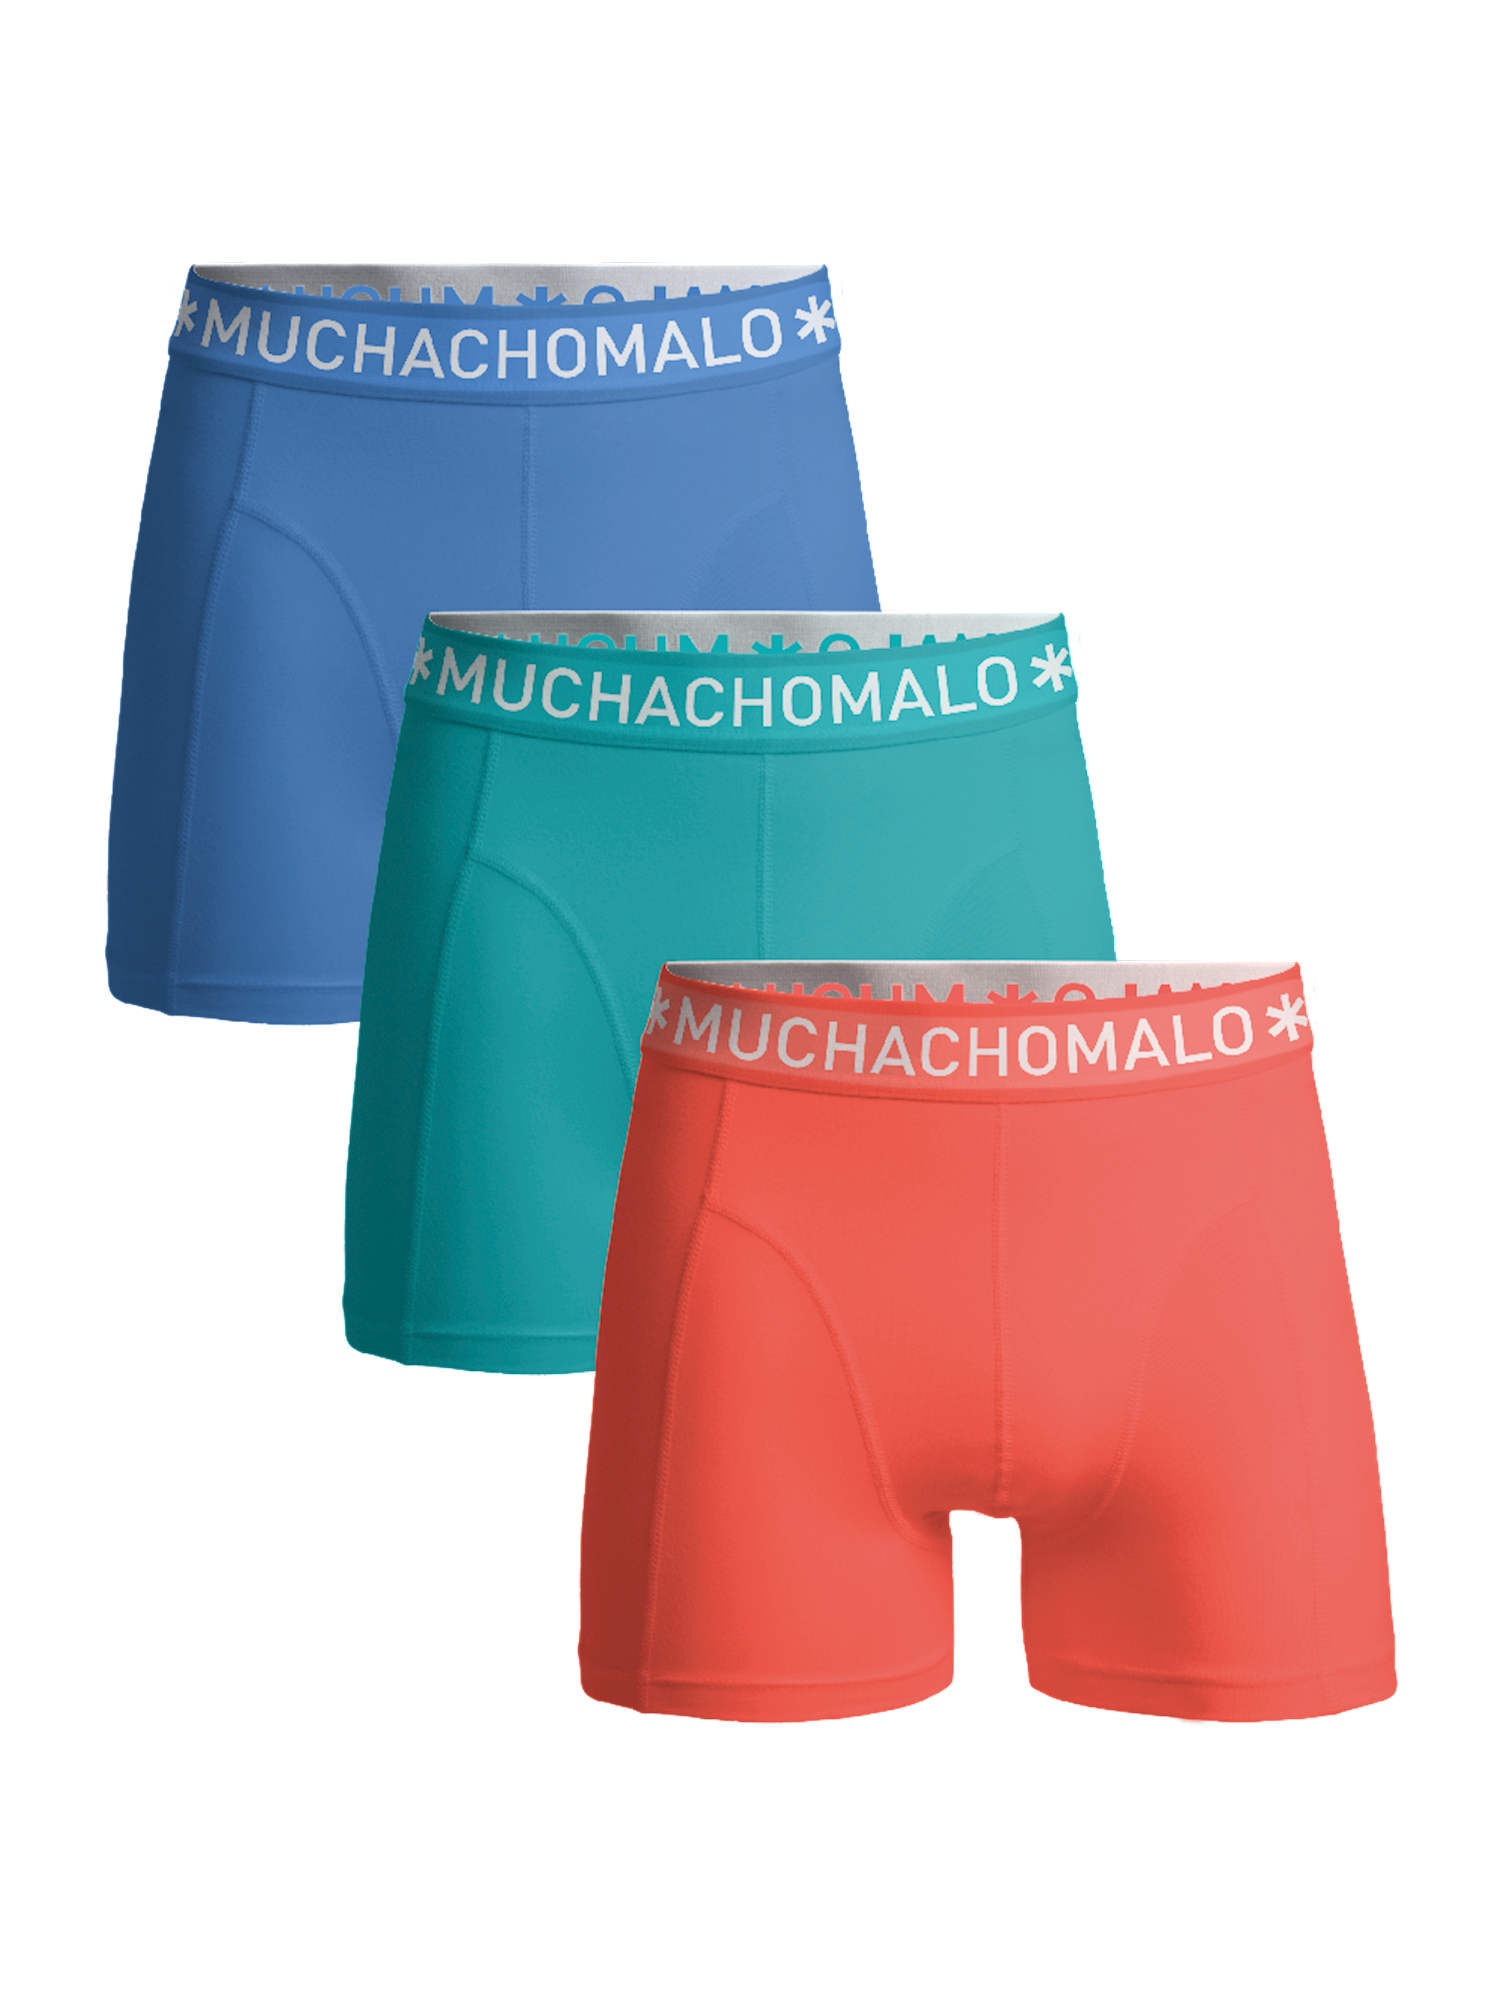 Muchachomalo Boxer 3-pack Solid 621